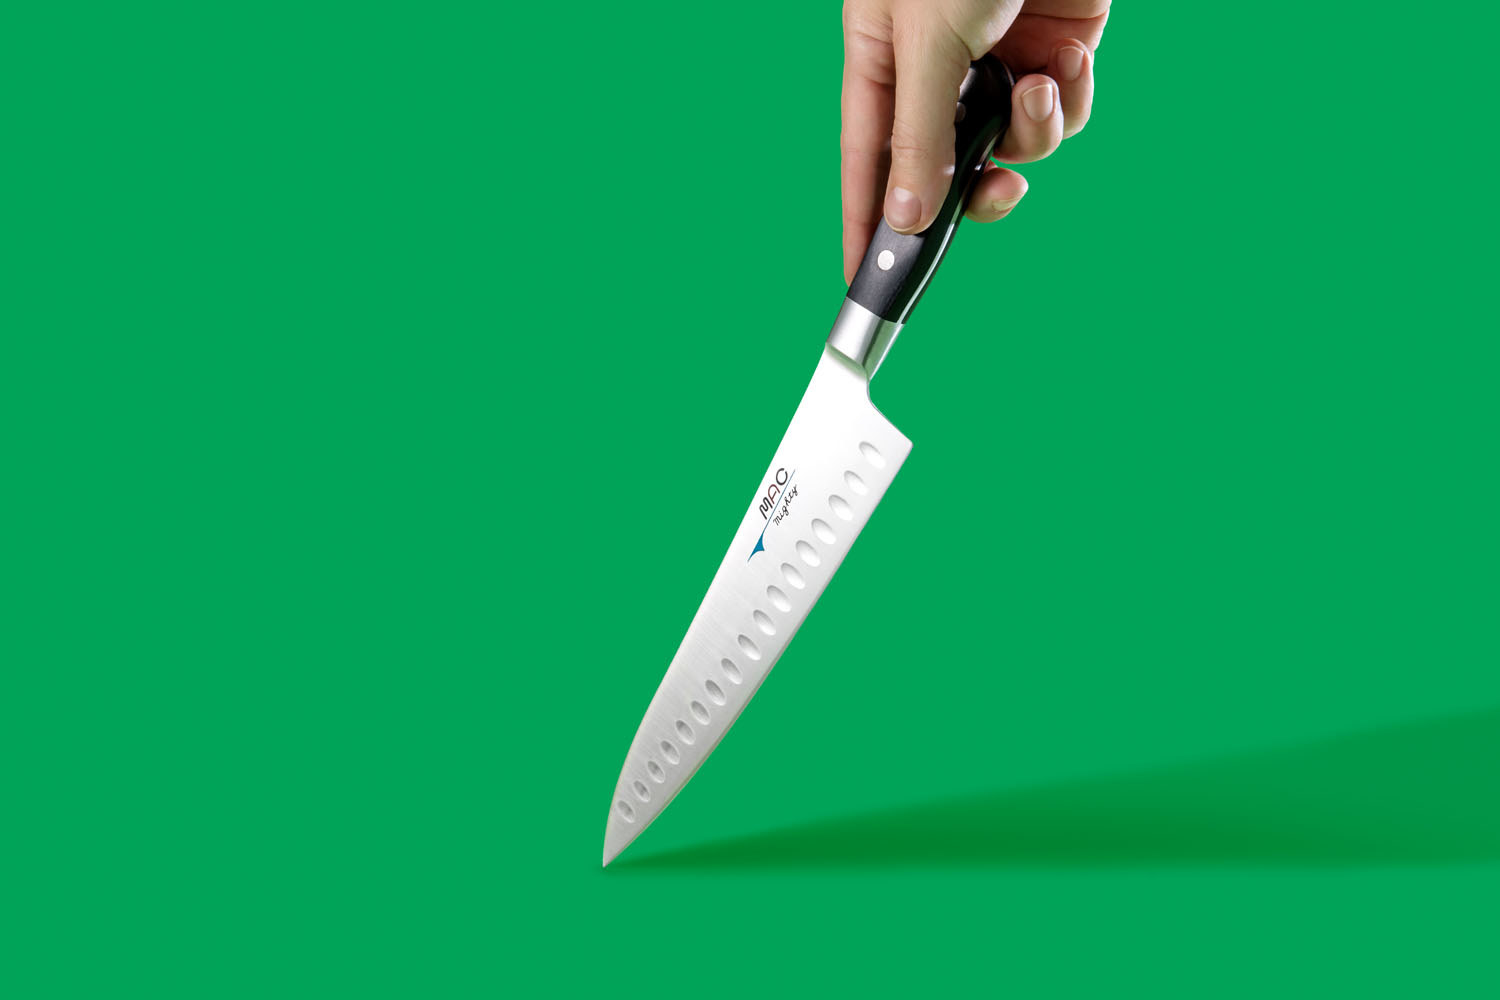 MAC Professional Mighty Chef's Knife 8 1/2